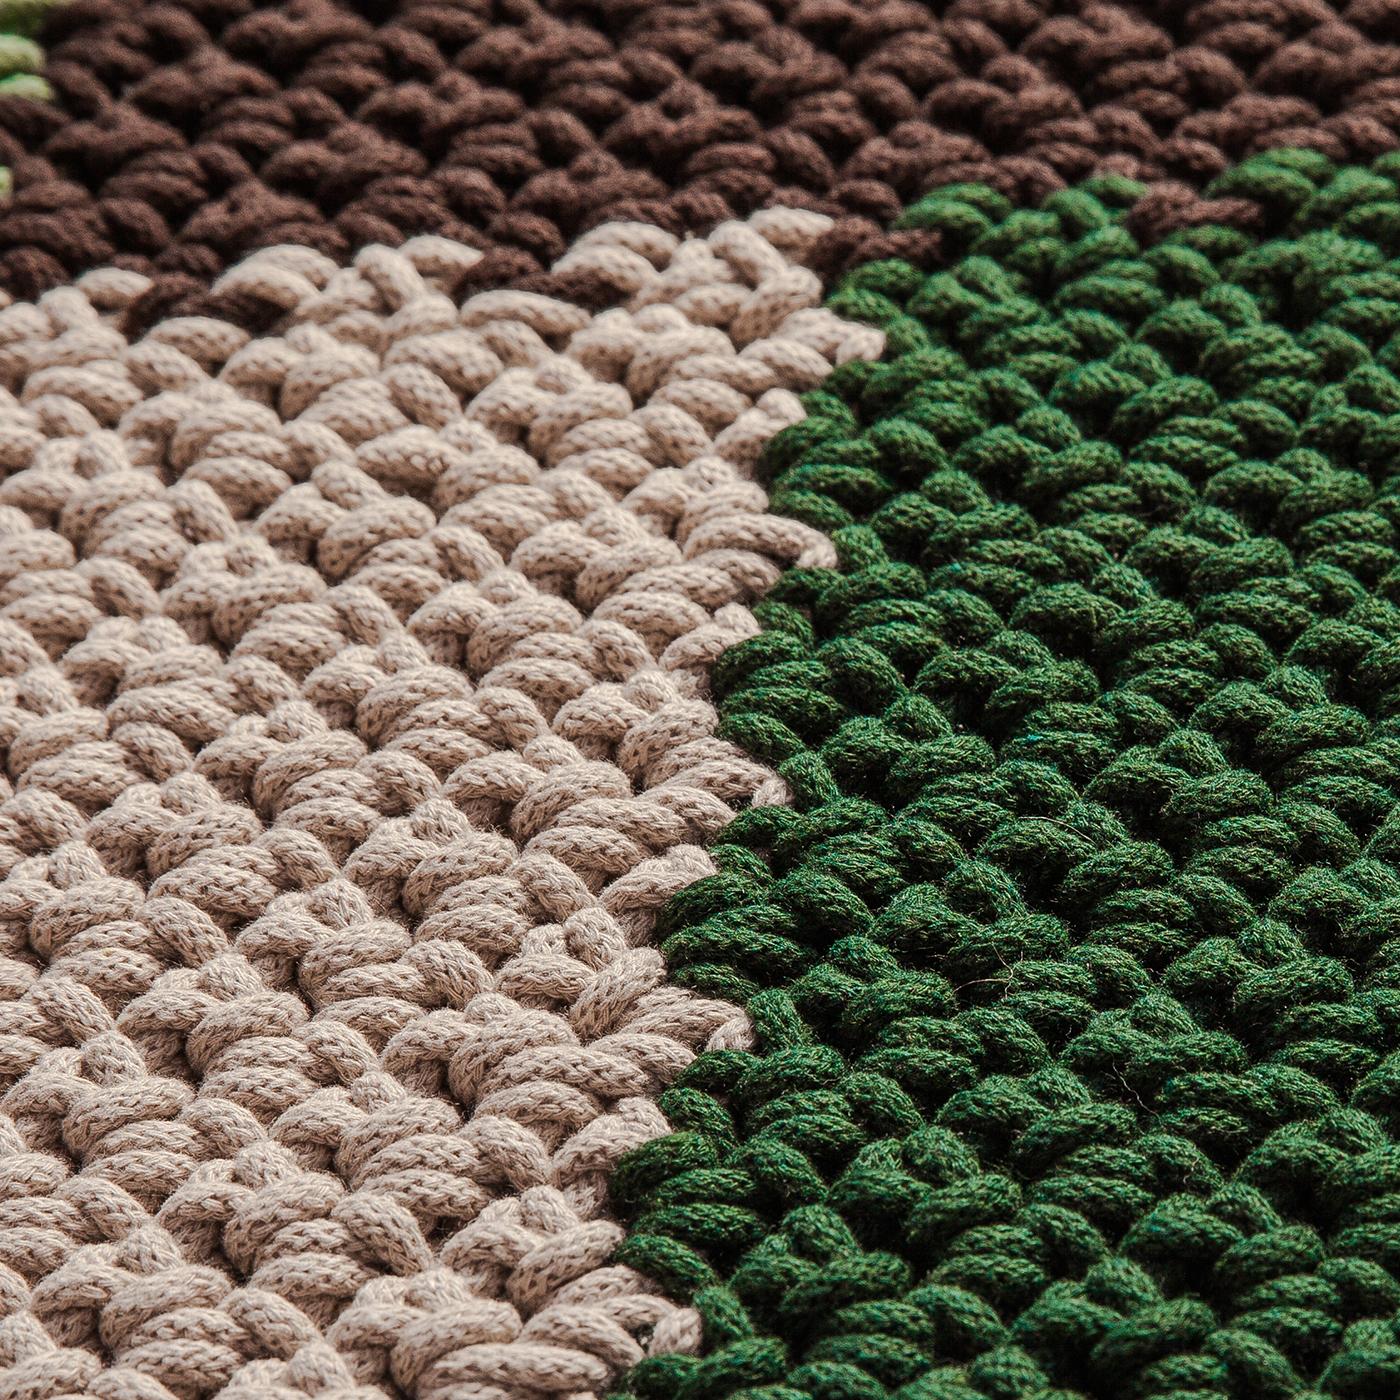 Showcasing elegant and earthy hues inspired by the pine trees typical of the city of Pineto, this exquisite runner rug is an impeccable celebration of nature. Masterfully crocheted by hand, it is fashioned of a fine and recycled cotton material that